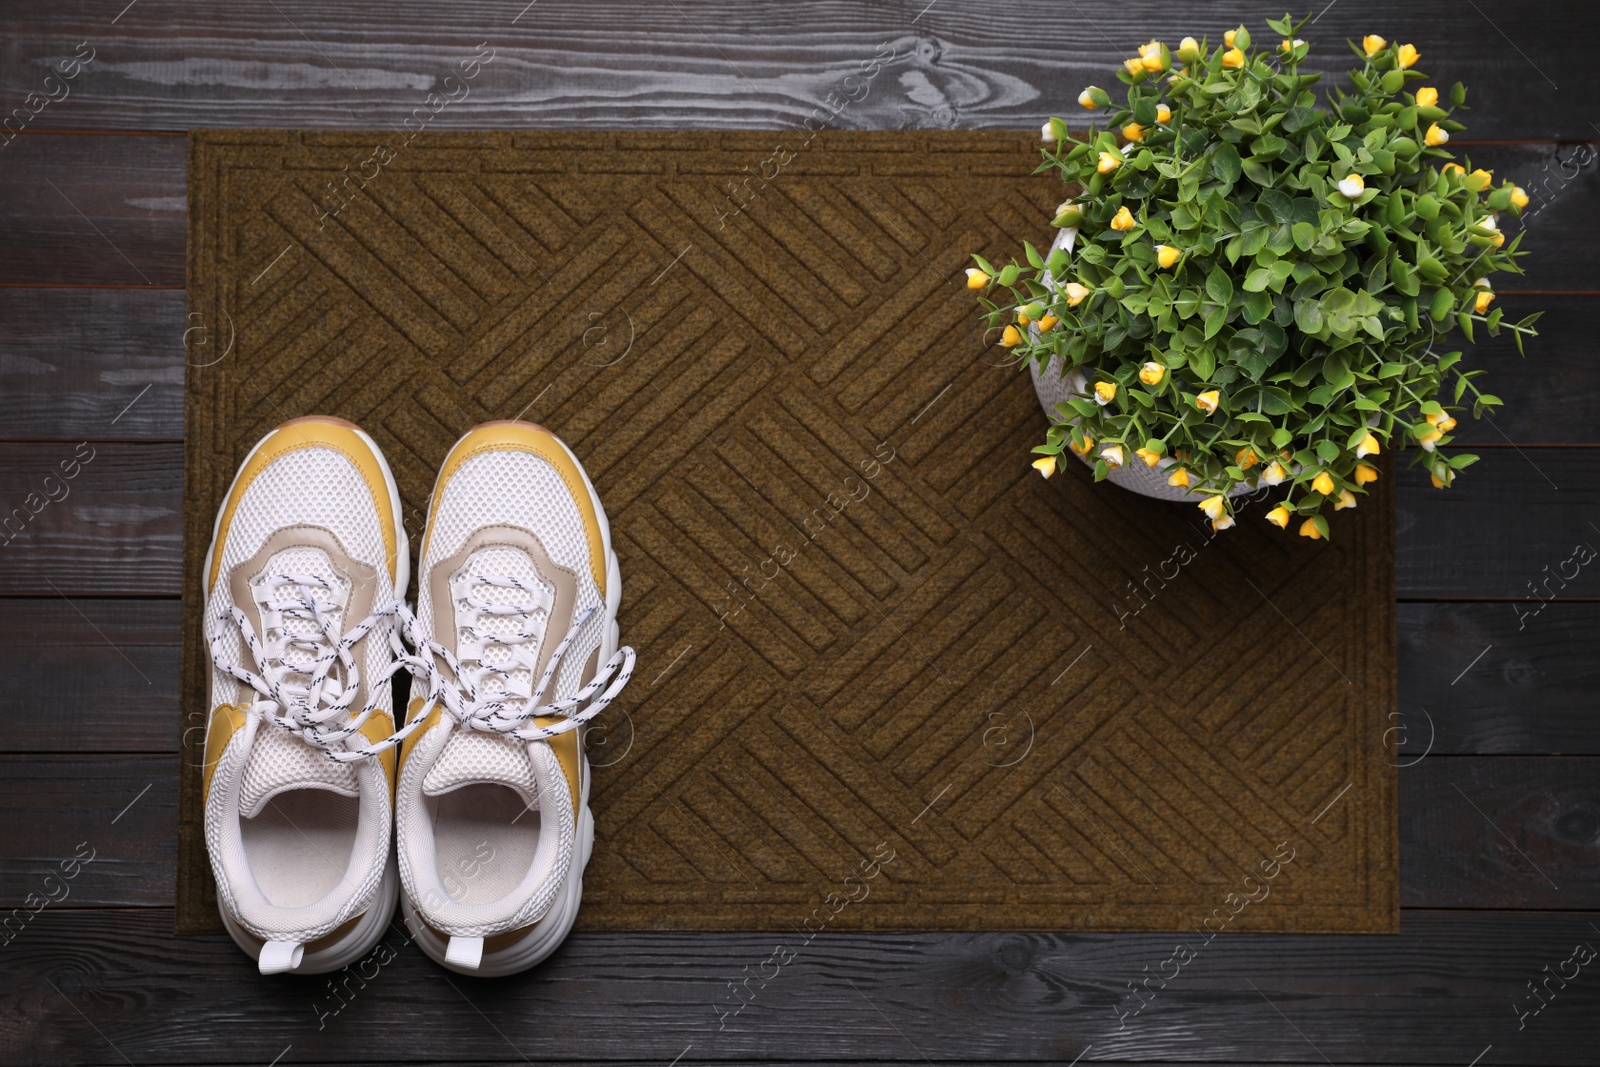 Photo of New clean door mat with shoes and plant on black wooden floor, top view